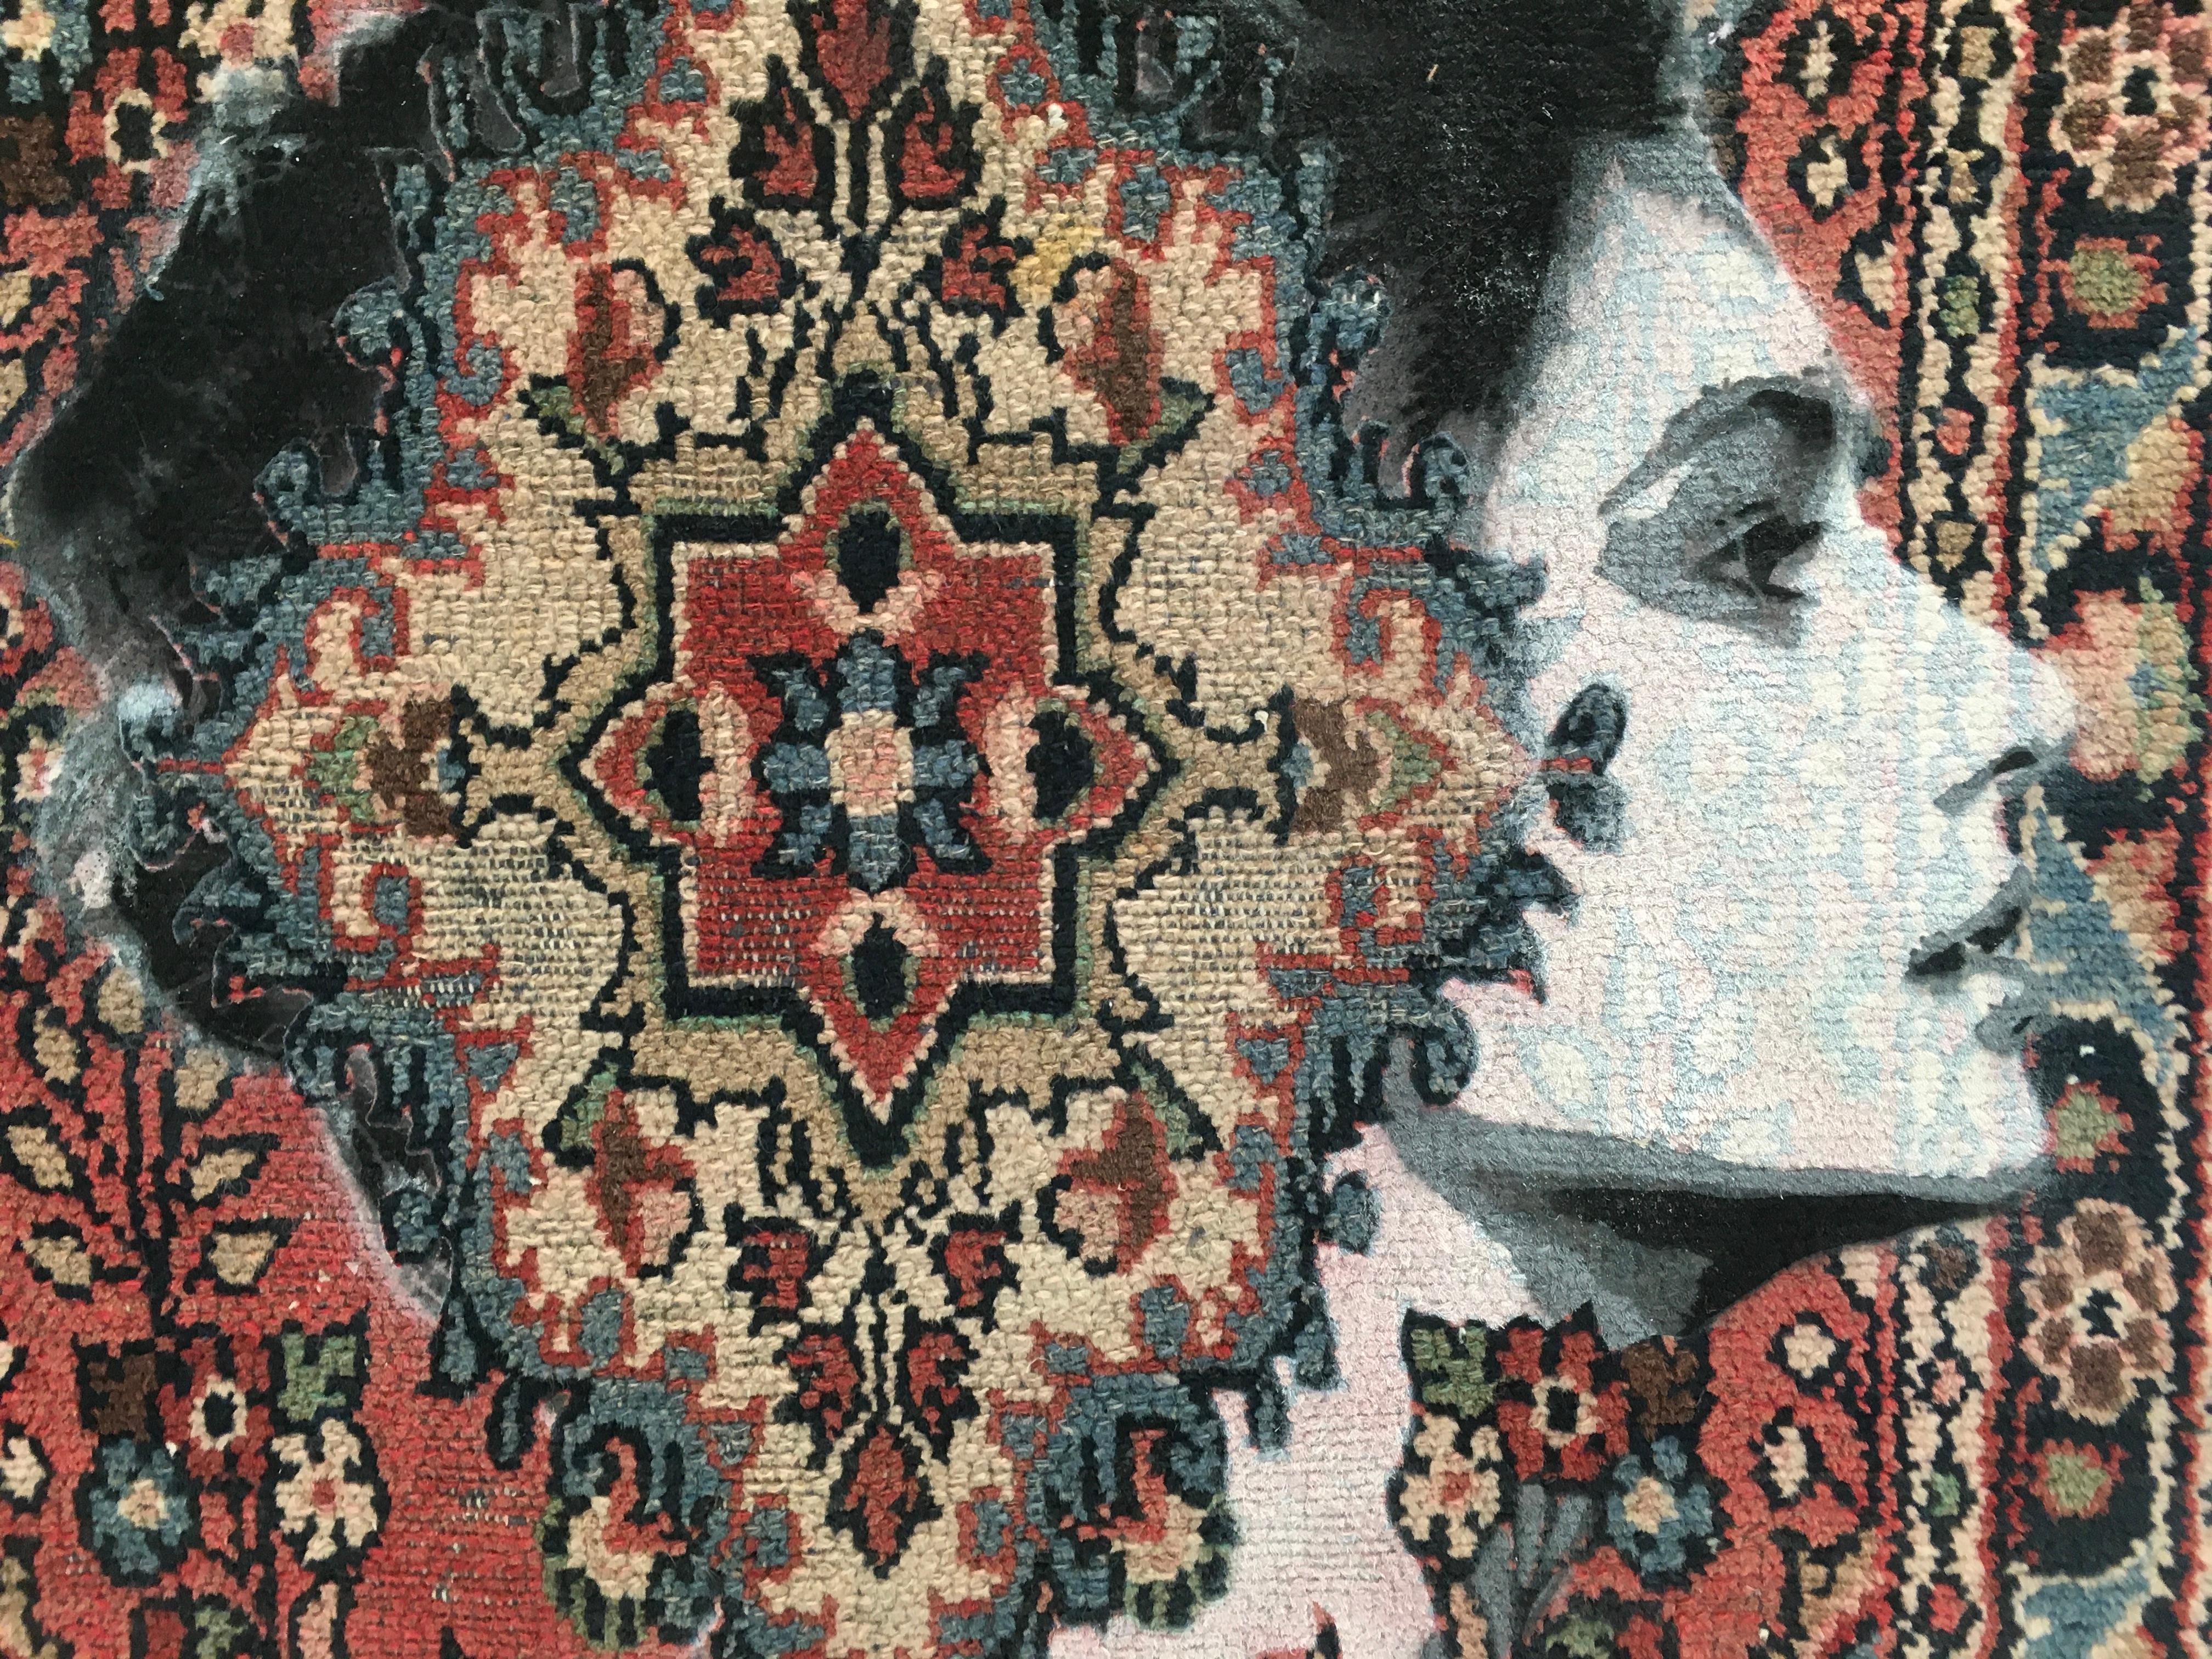 In Her Head In The End, Spray Paint and Marker on Old Iranian Rug - Painting by Nafir